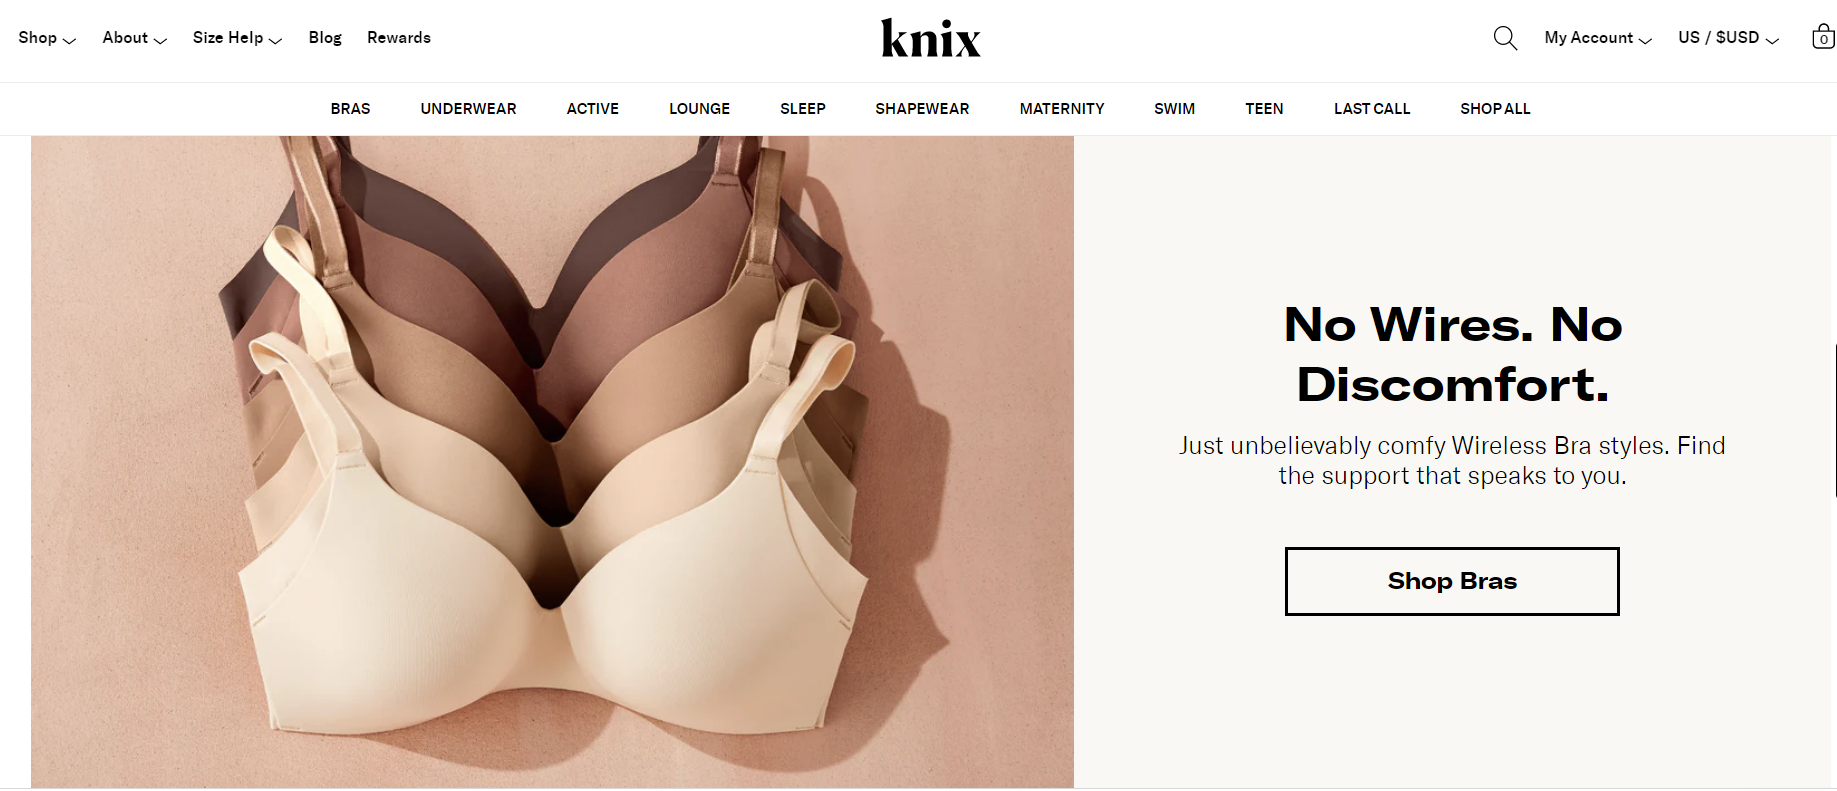 Knix Wear Goes From Niche to Mainstream with Knix.com Upgrade